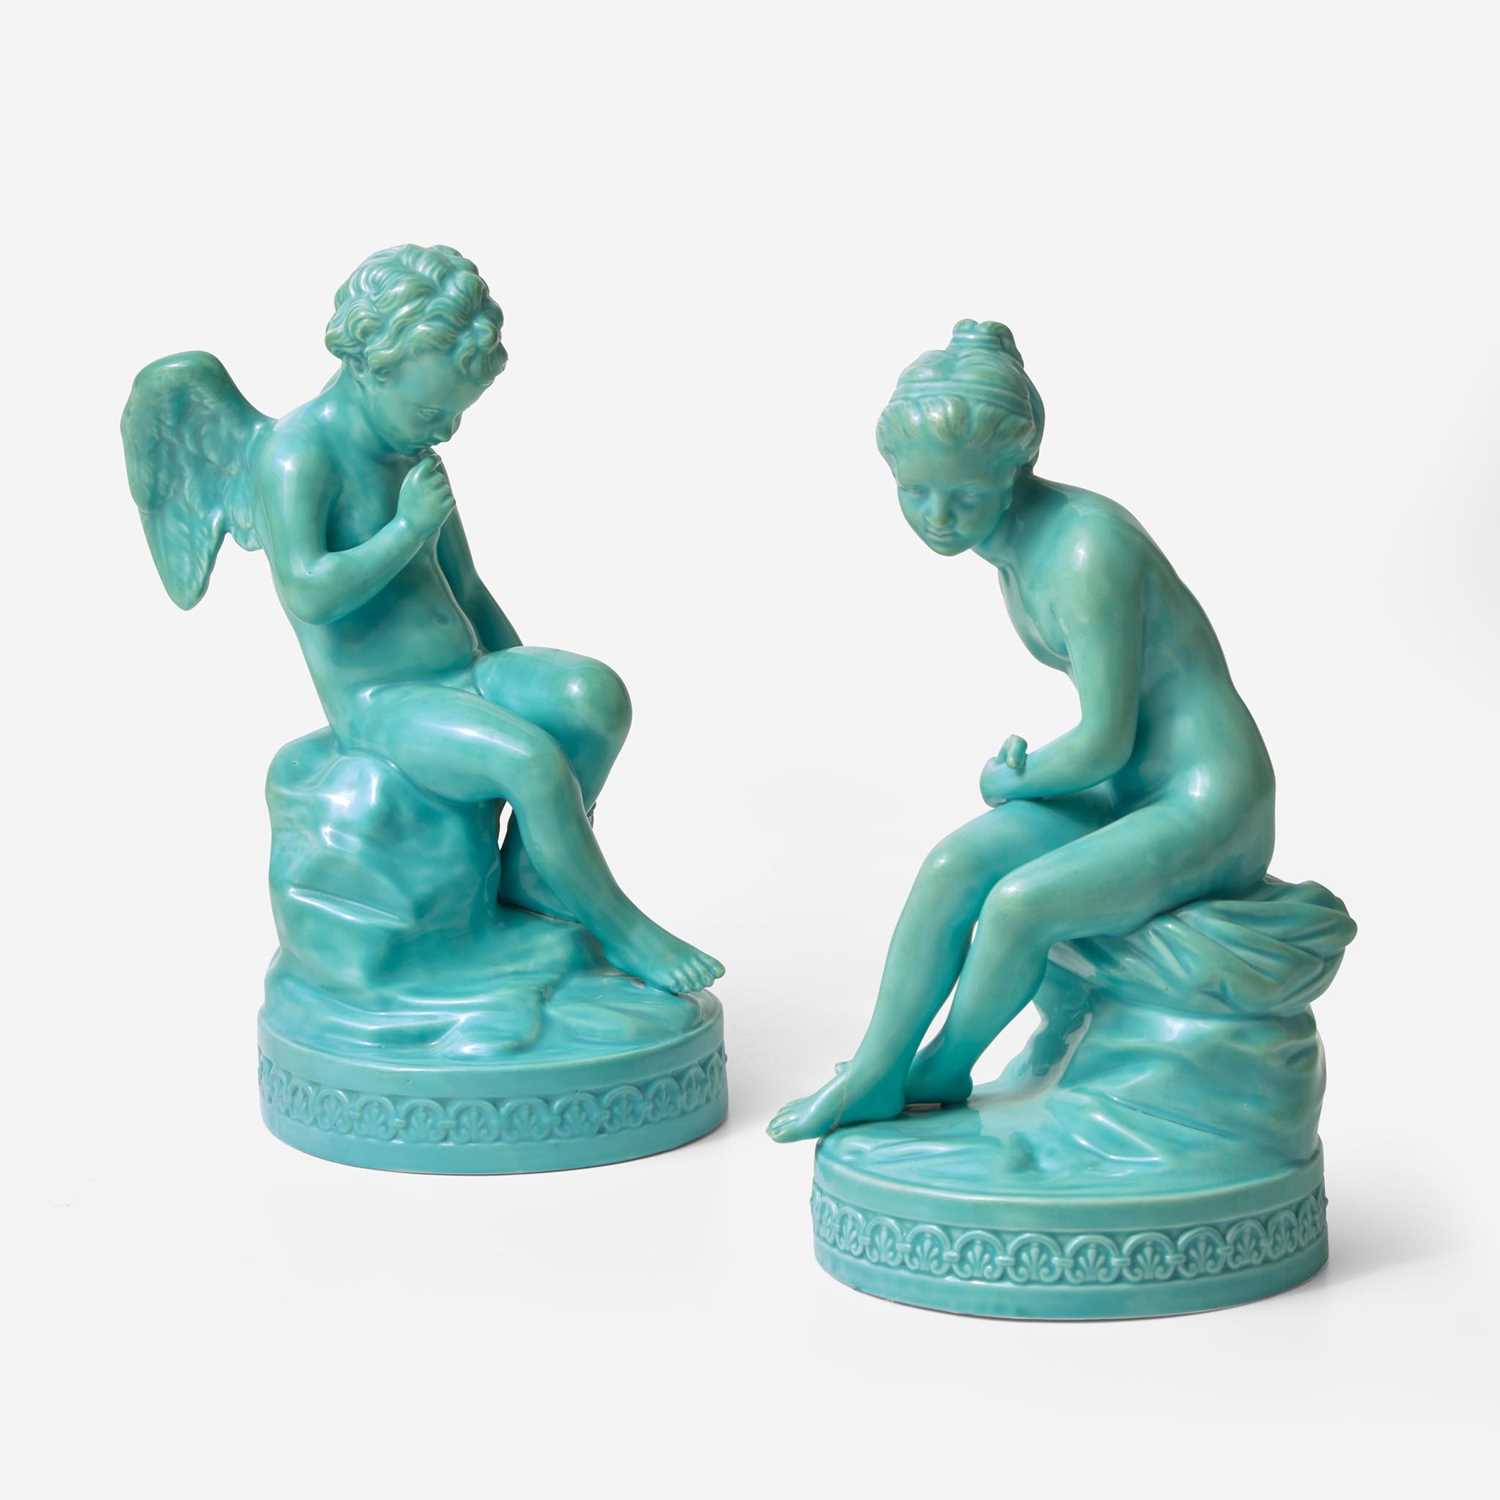 Lot 114 - Wedgwood Turquoise-Glazed Figures of Cupid and Psyche